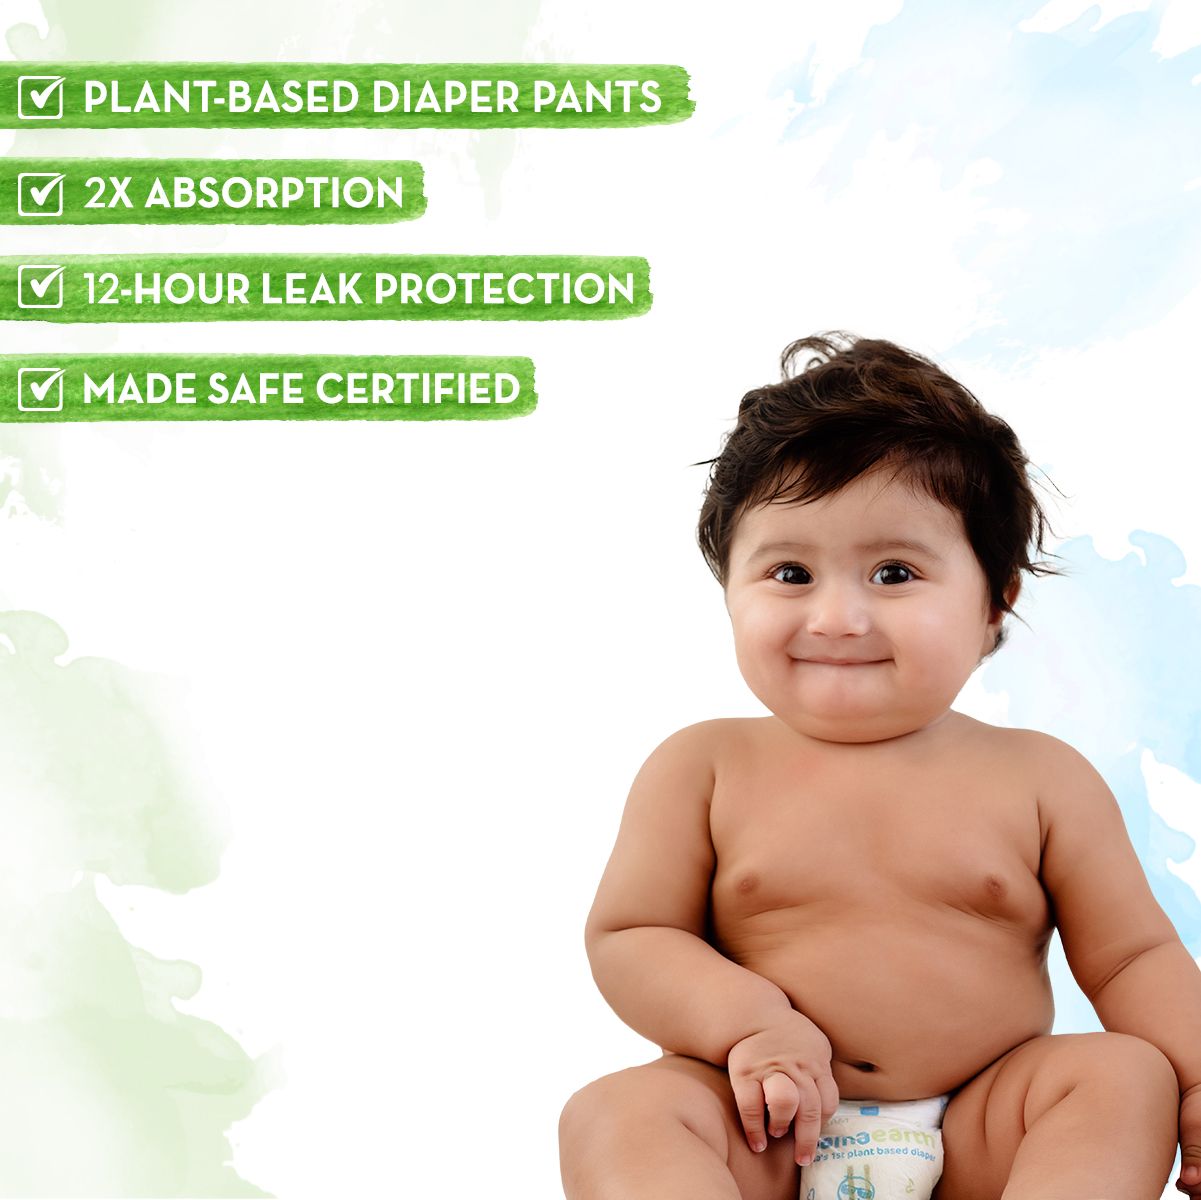 MamyPoko Pants Extra Absorb Diapers XL  32 Diapers Buy MamyPoko Pants  Extra Absorb Diapers XL  32 Diapers Online at Best Price in India  Nykaa